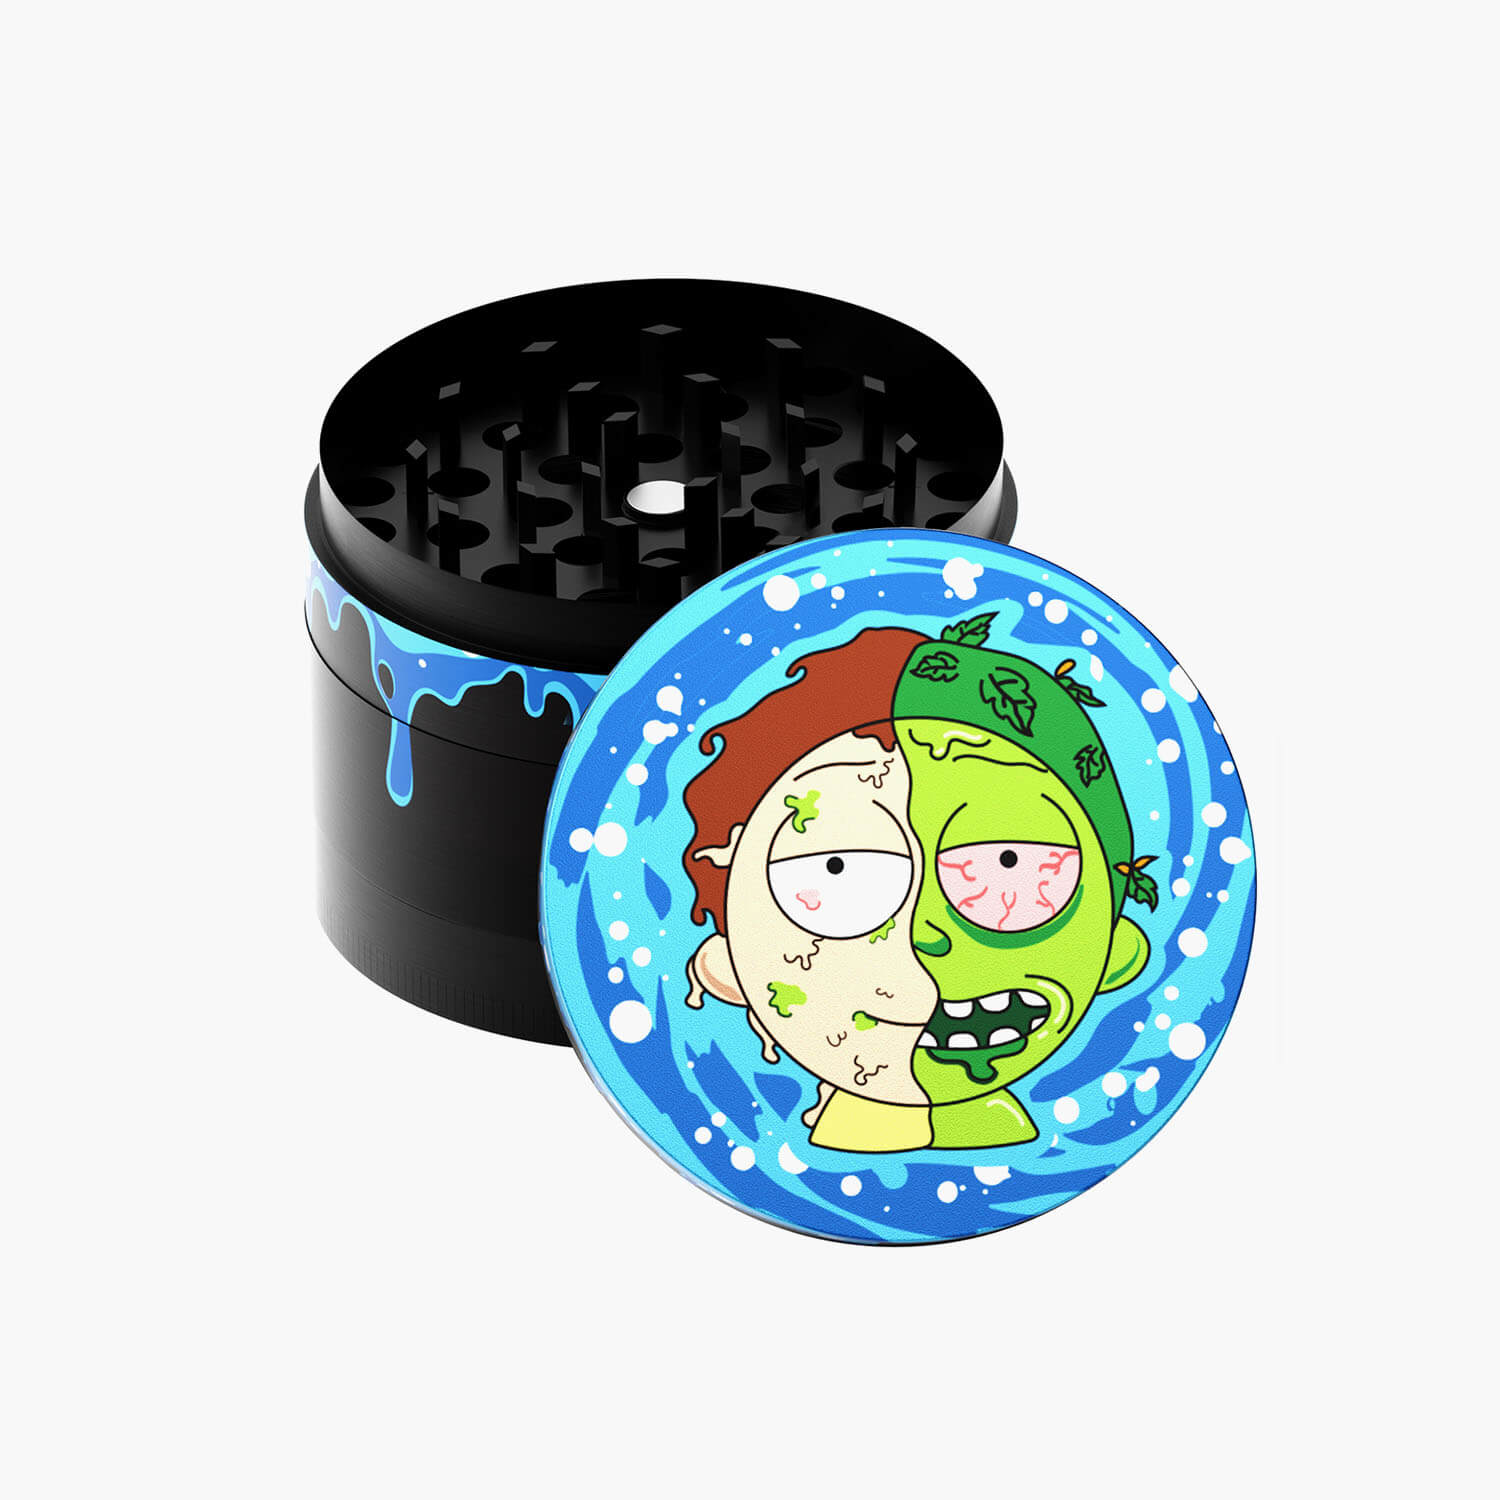 2 Rick and Morty Grinder